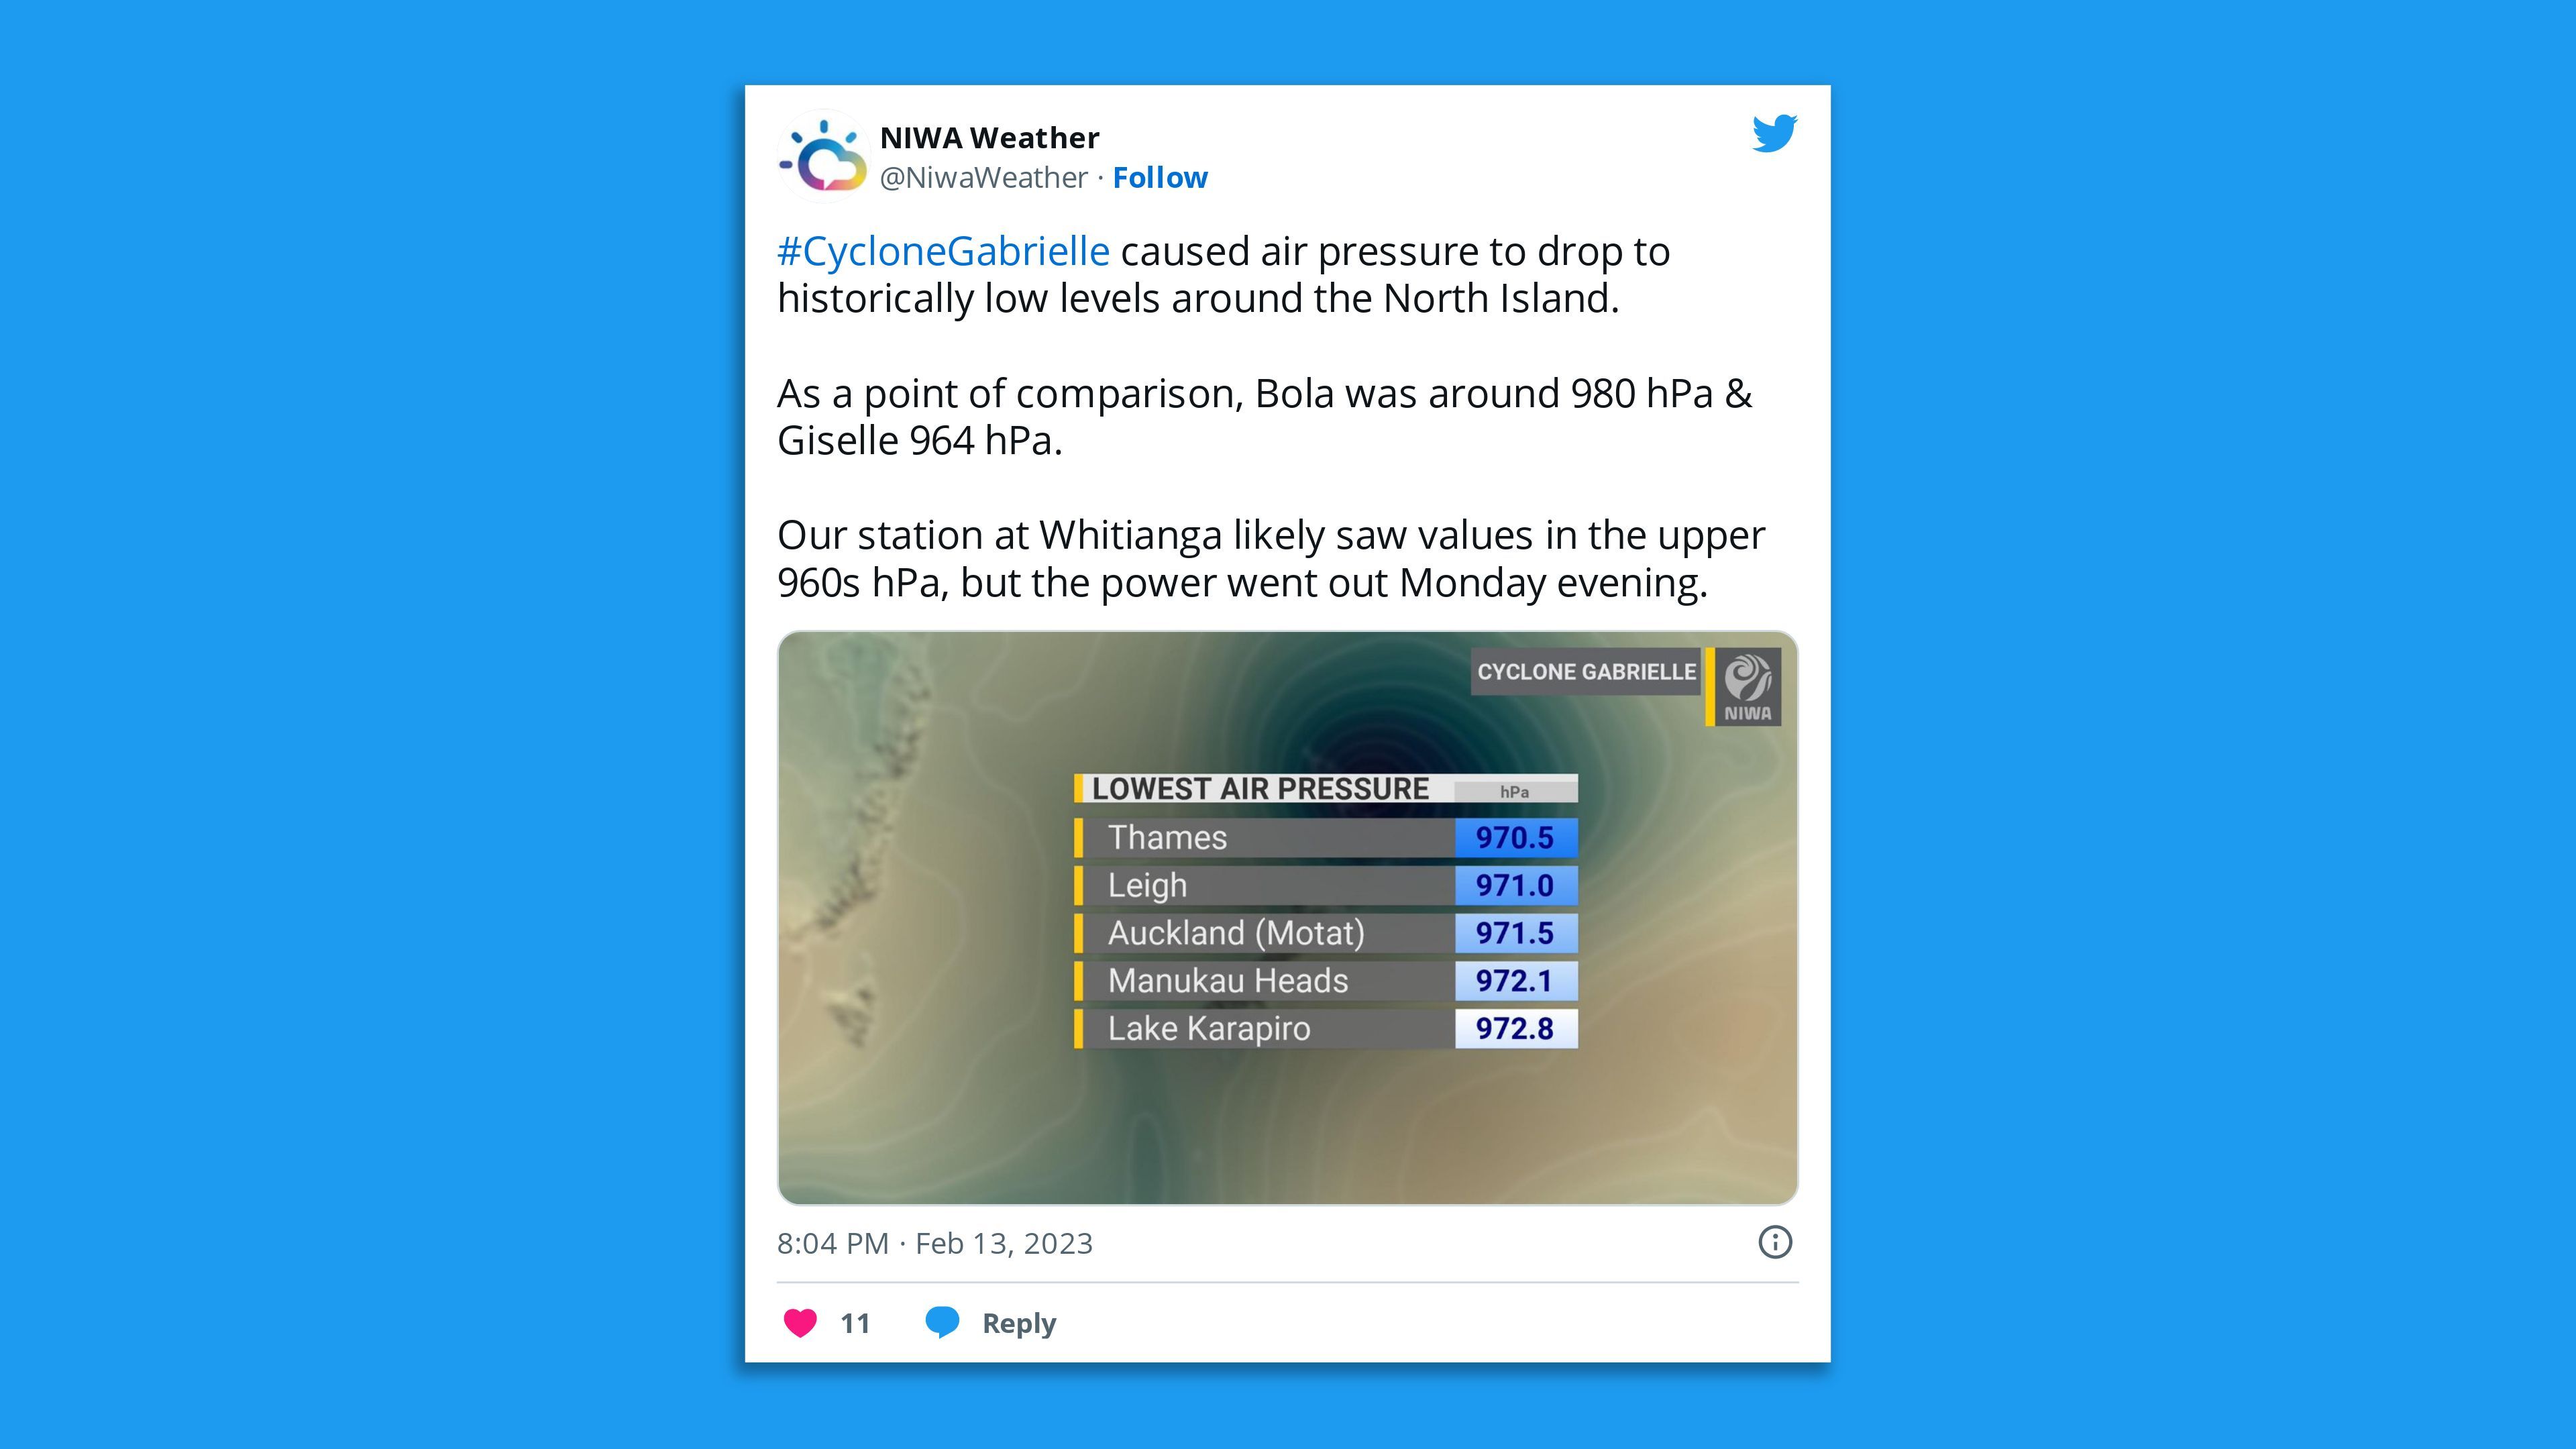 A screenshot of a NIWA tweet announcing record air pressure drops across northern New Zealand due to Cyclone Gabrielle.